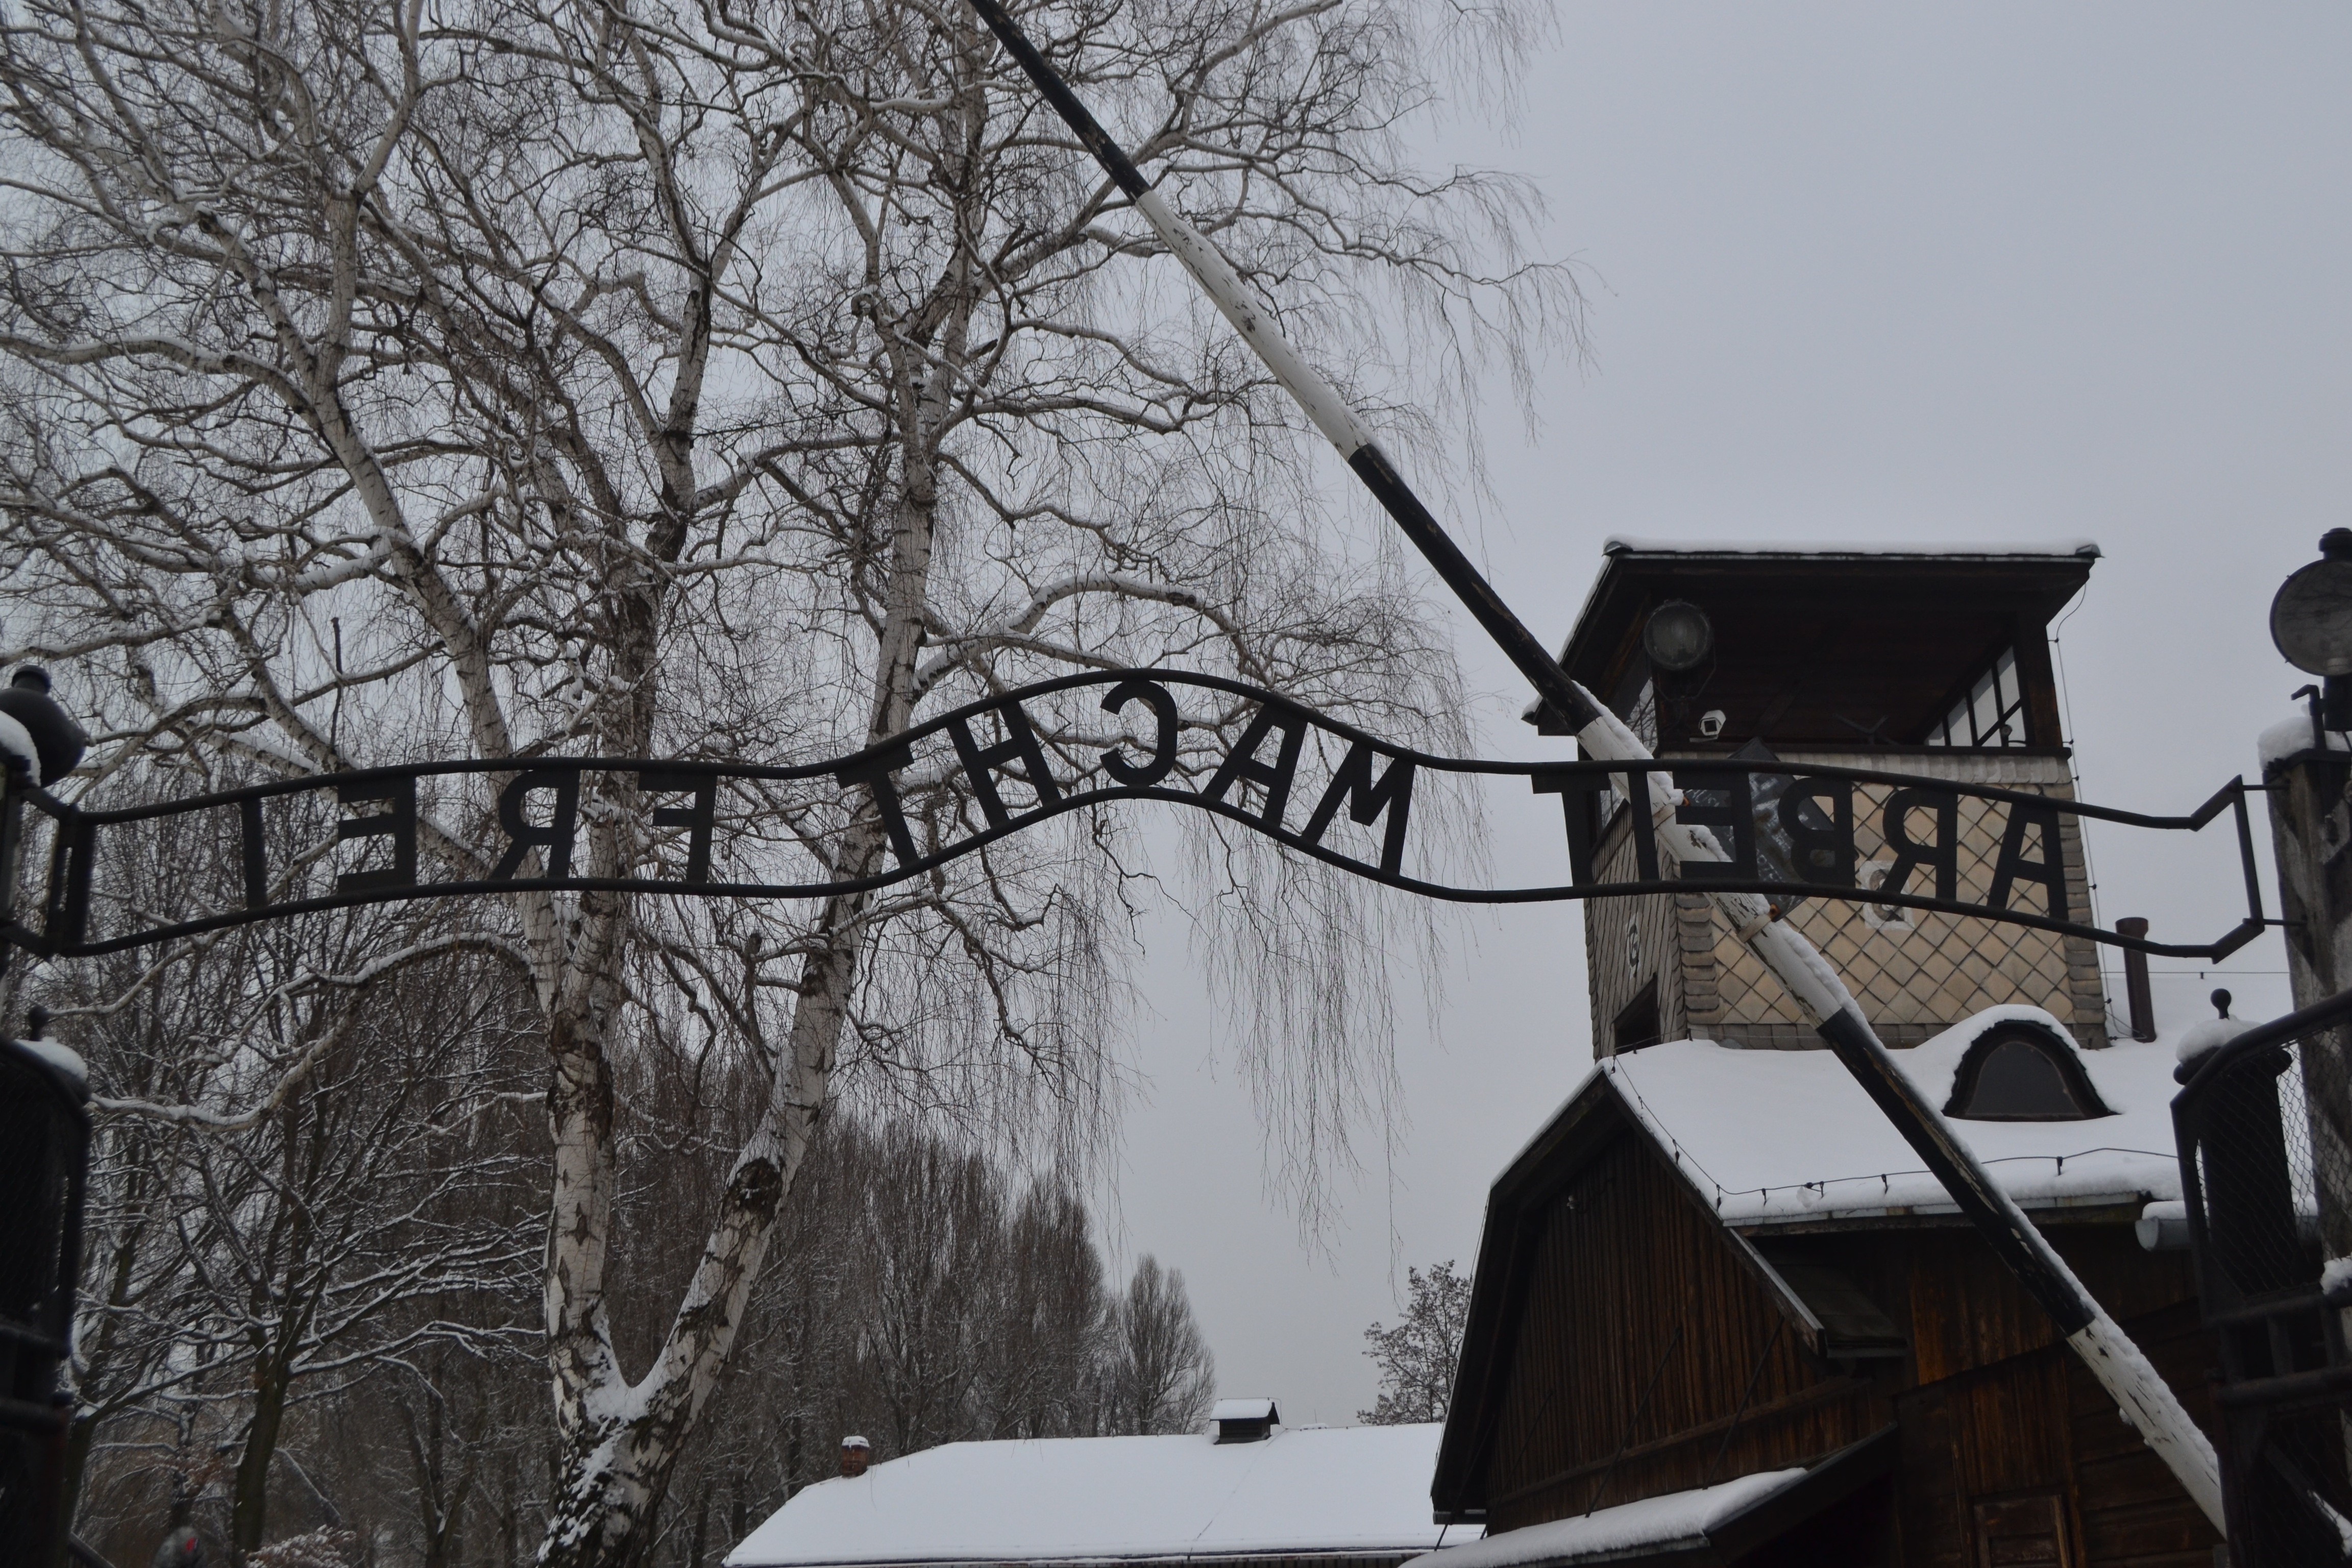 View of the entrance sign from inside Auschwitz - I.